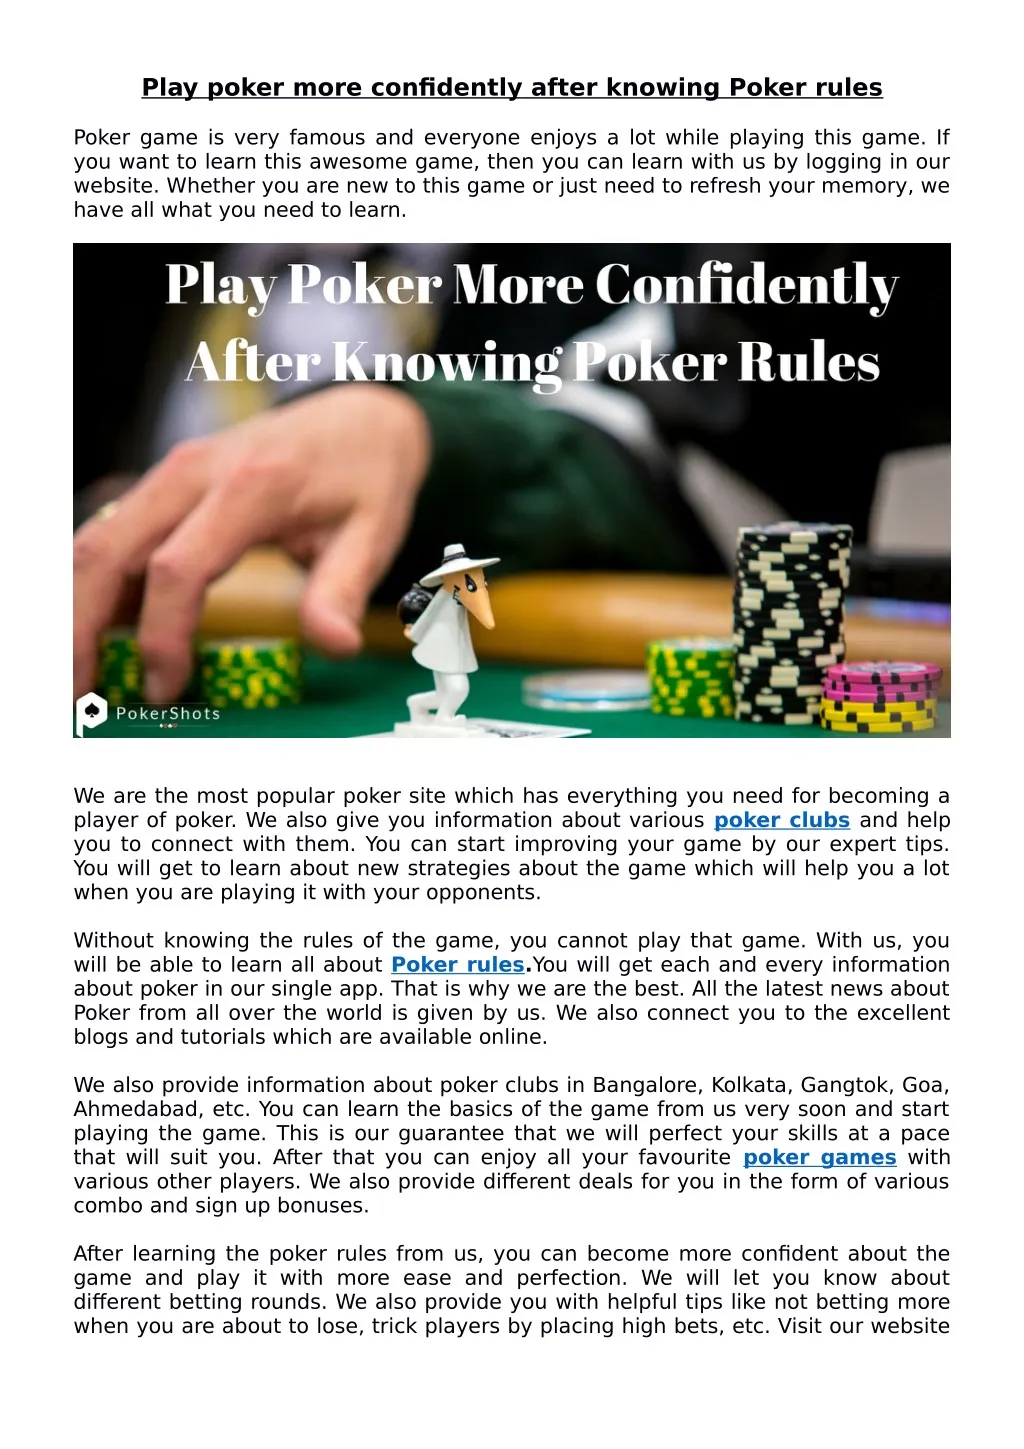 play poker more confidently after knowing poker